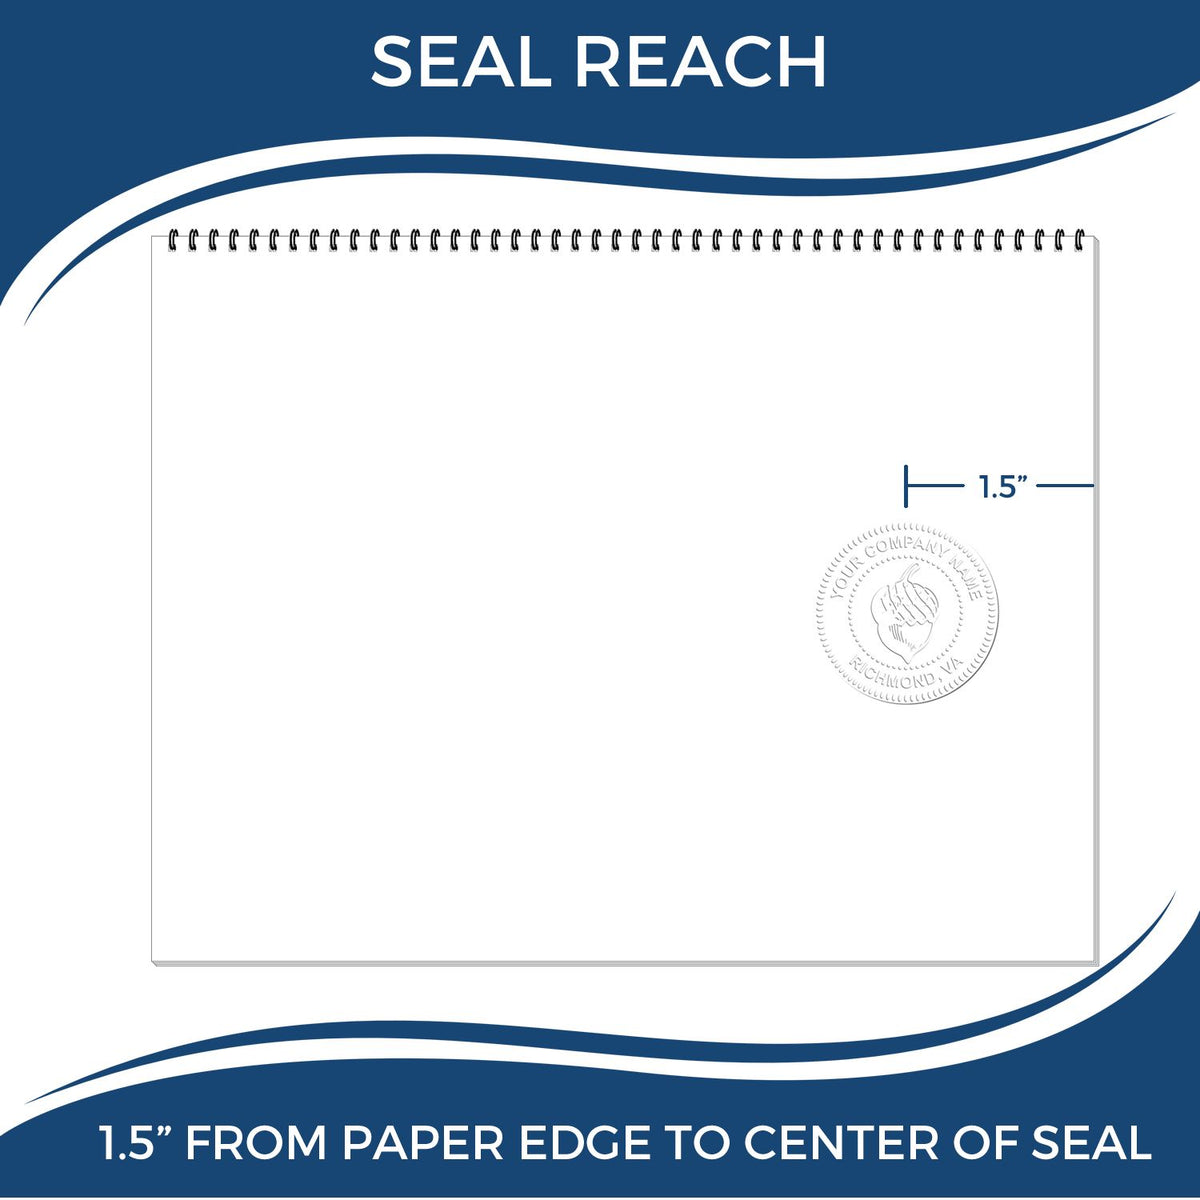 An infographic showing the seal reach which is represented by a ruler and a miniature seal image of the State of Iowa Soft Land Surveyor Embossing Seal